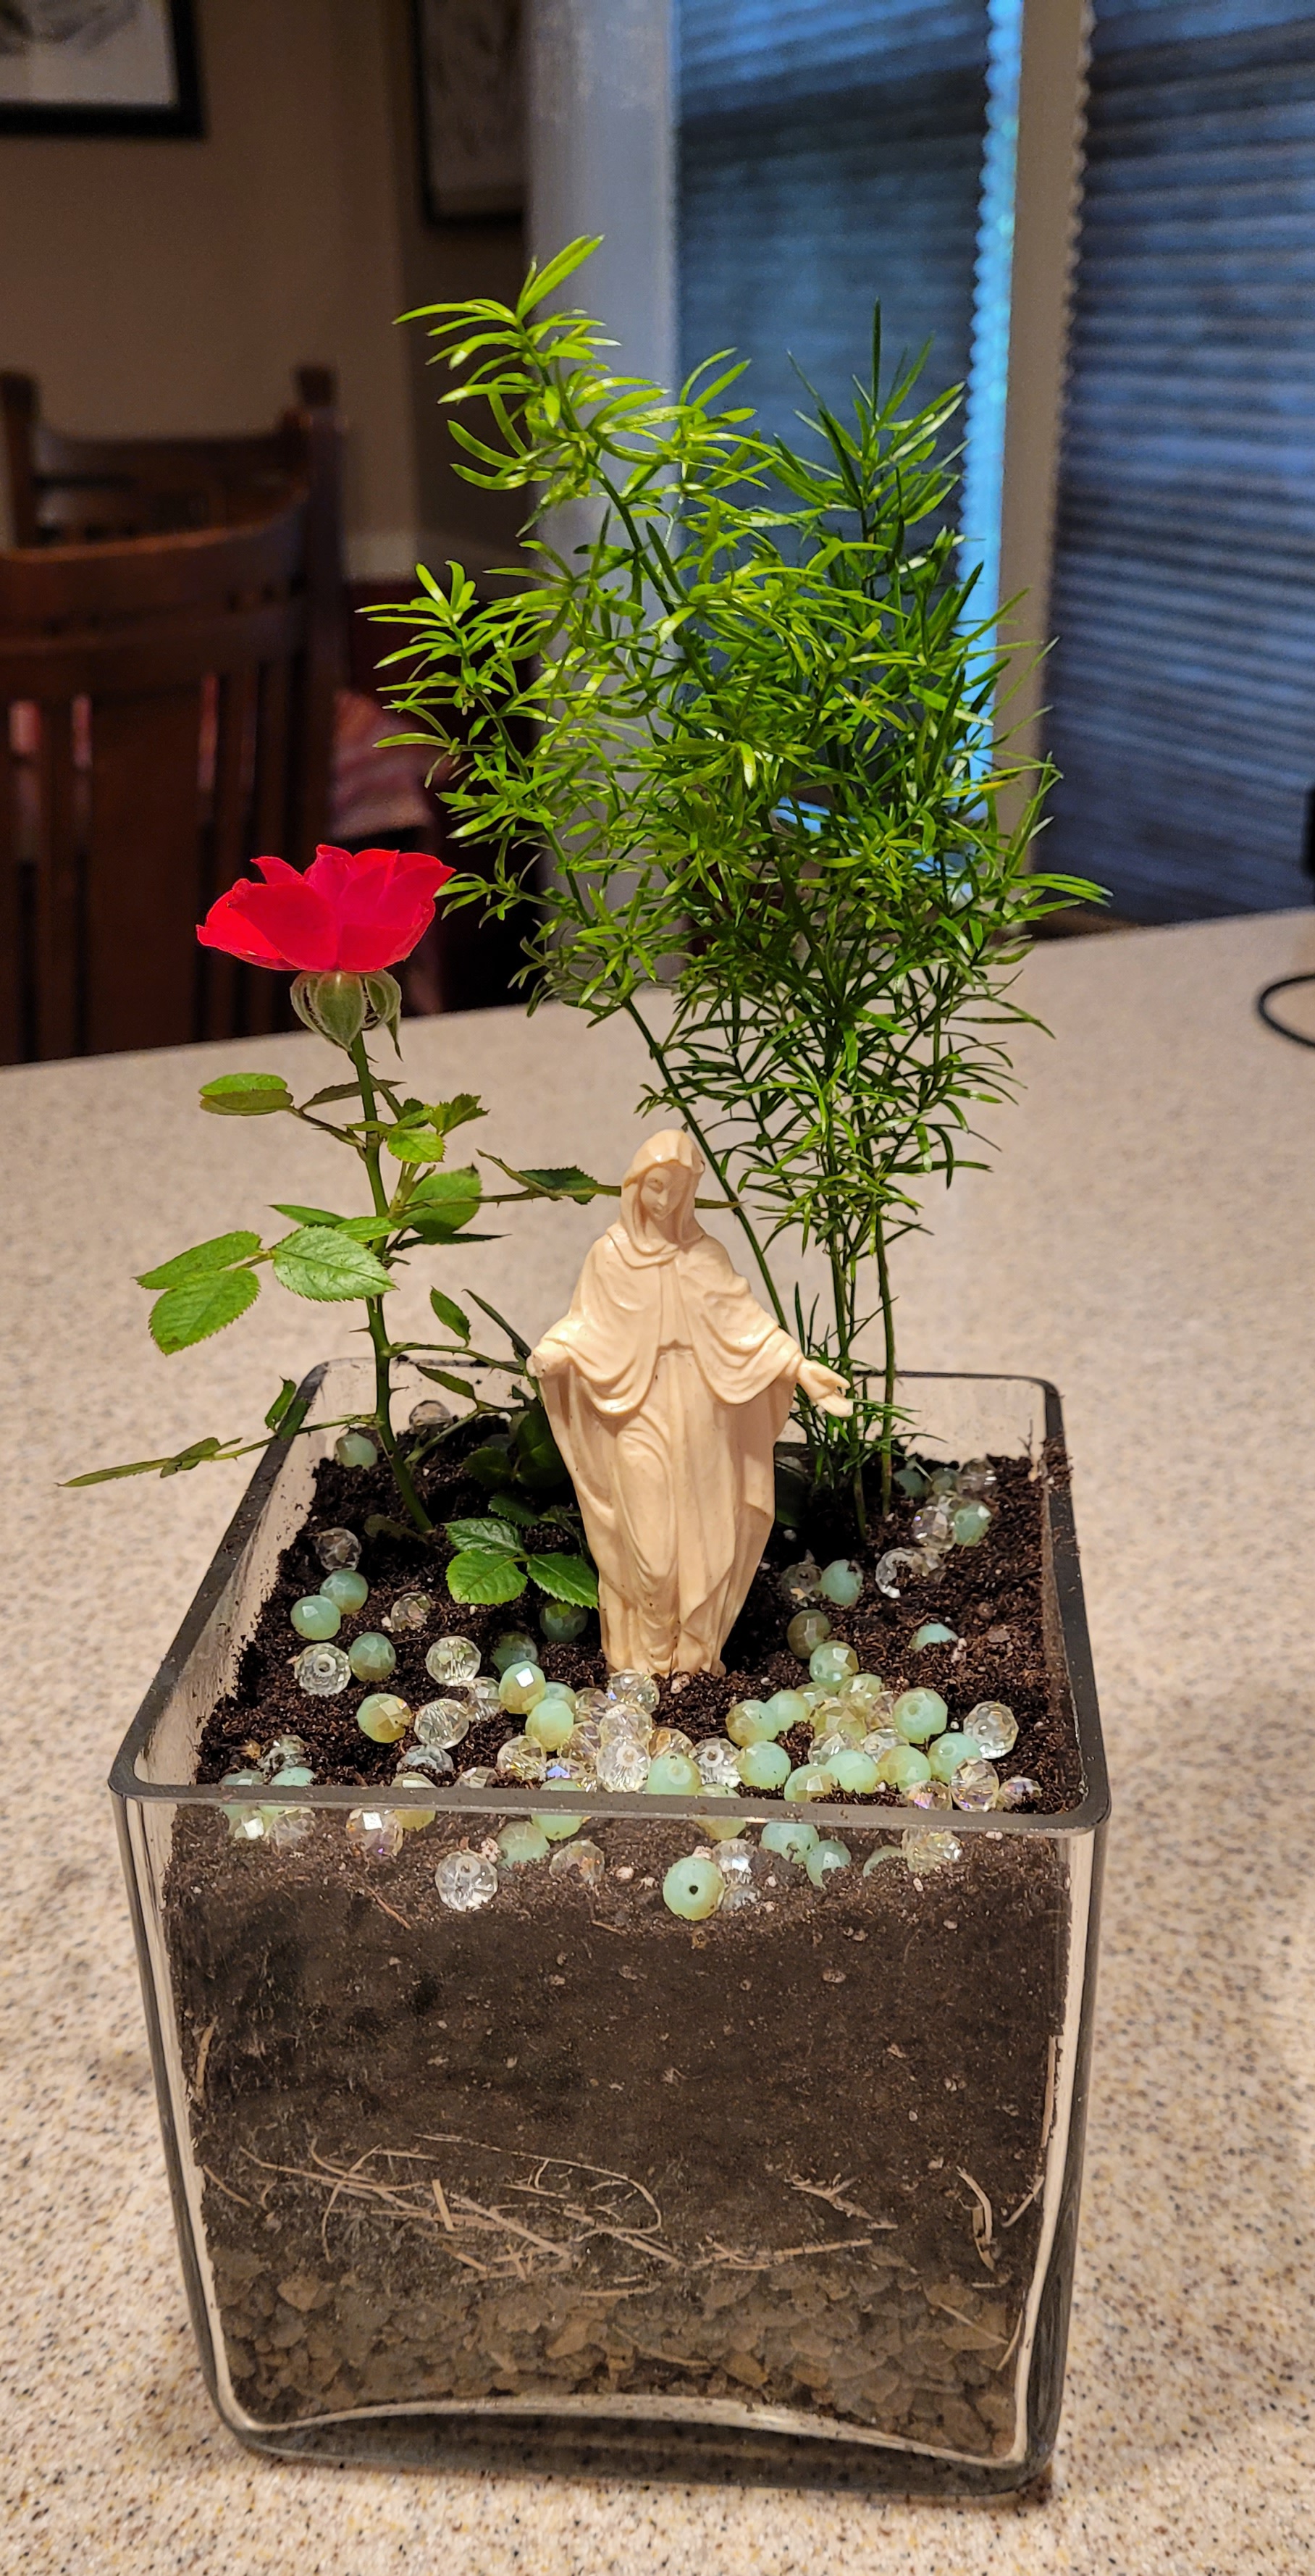 Mary garden in square glass container